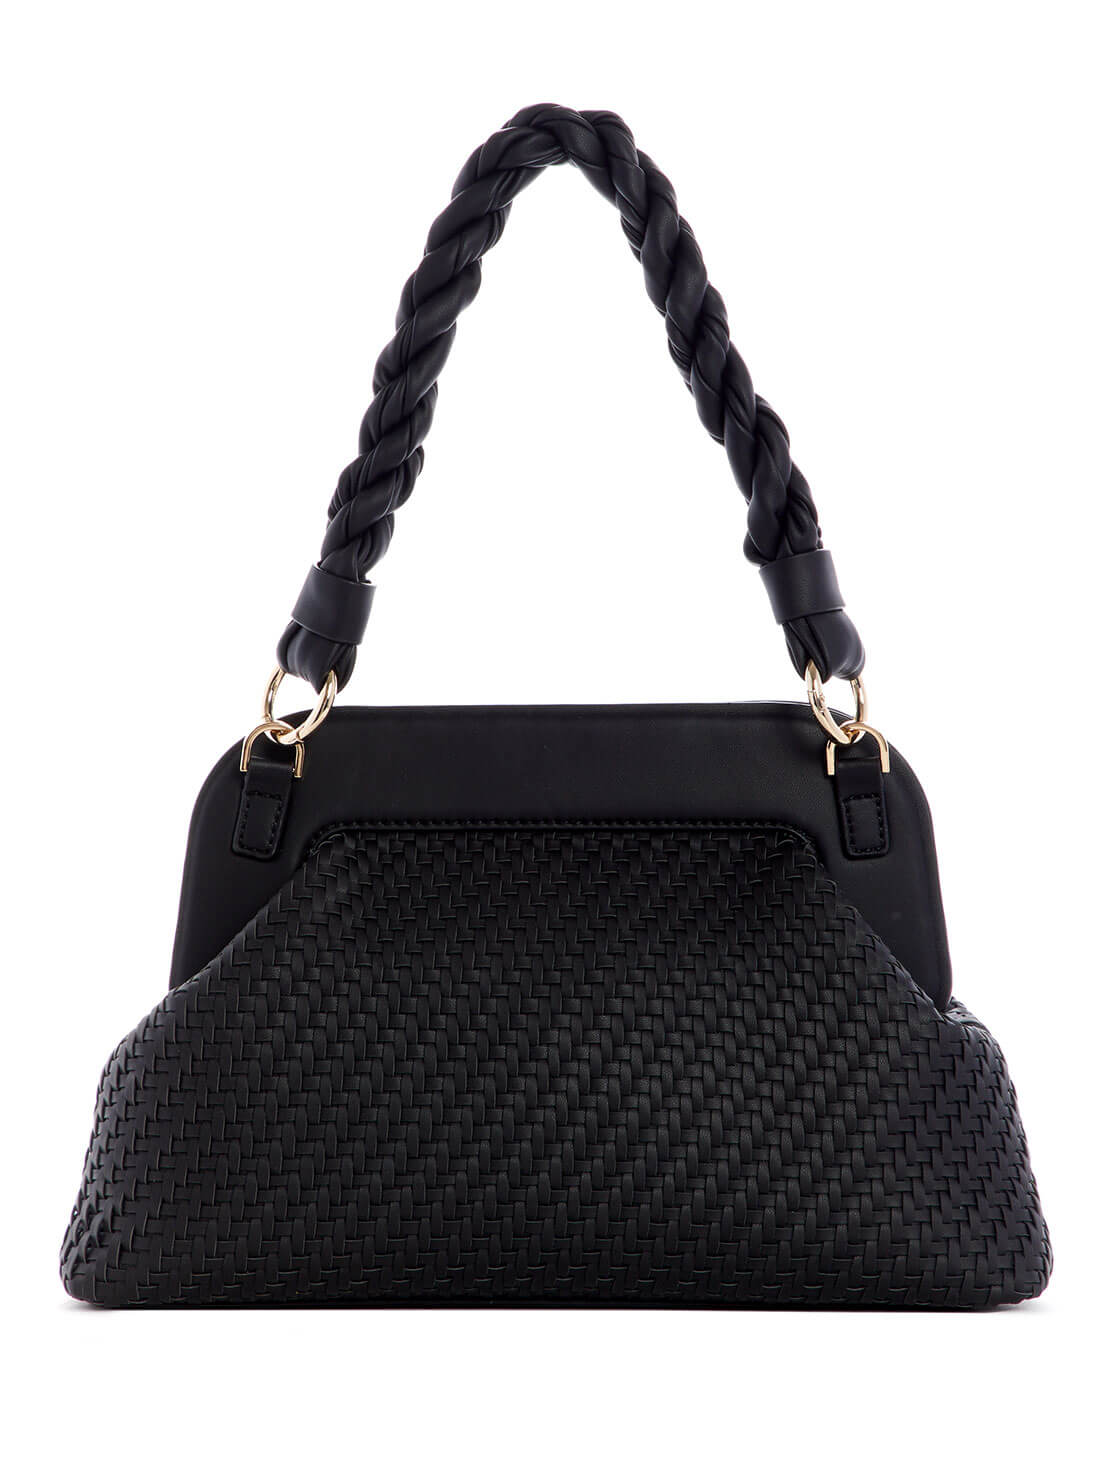 GUESS Women's Black Woven Hassie Frame Crossbody Bag VG839717 Back View